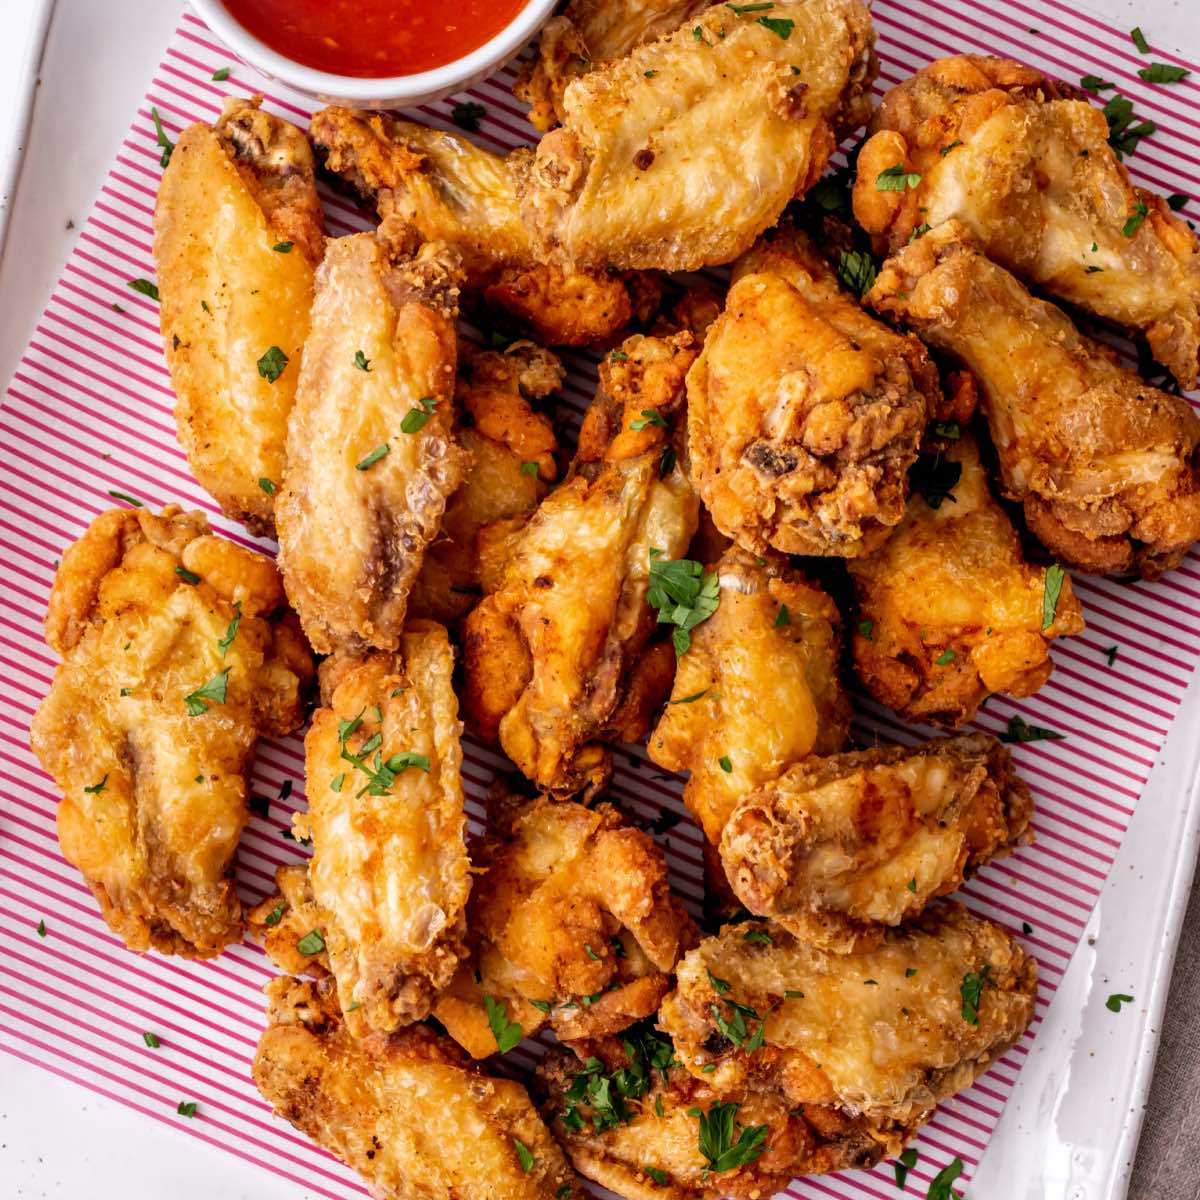 Top 4 Fried Chicken Wings Recipes